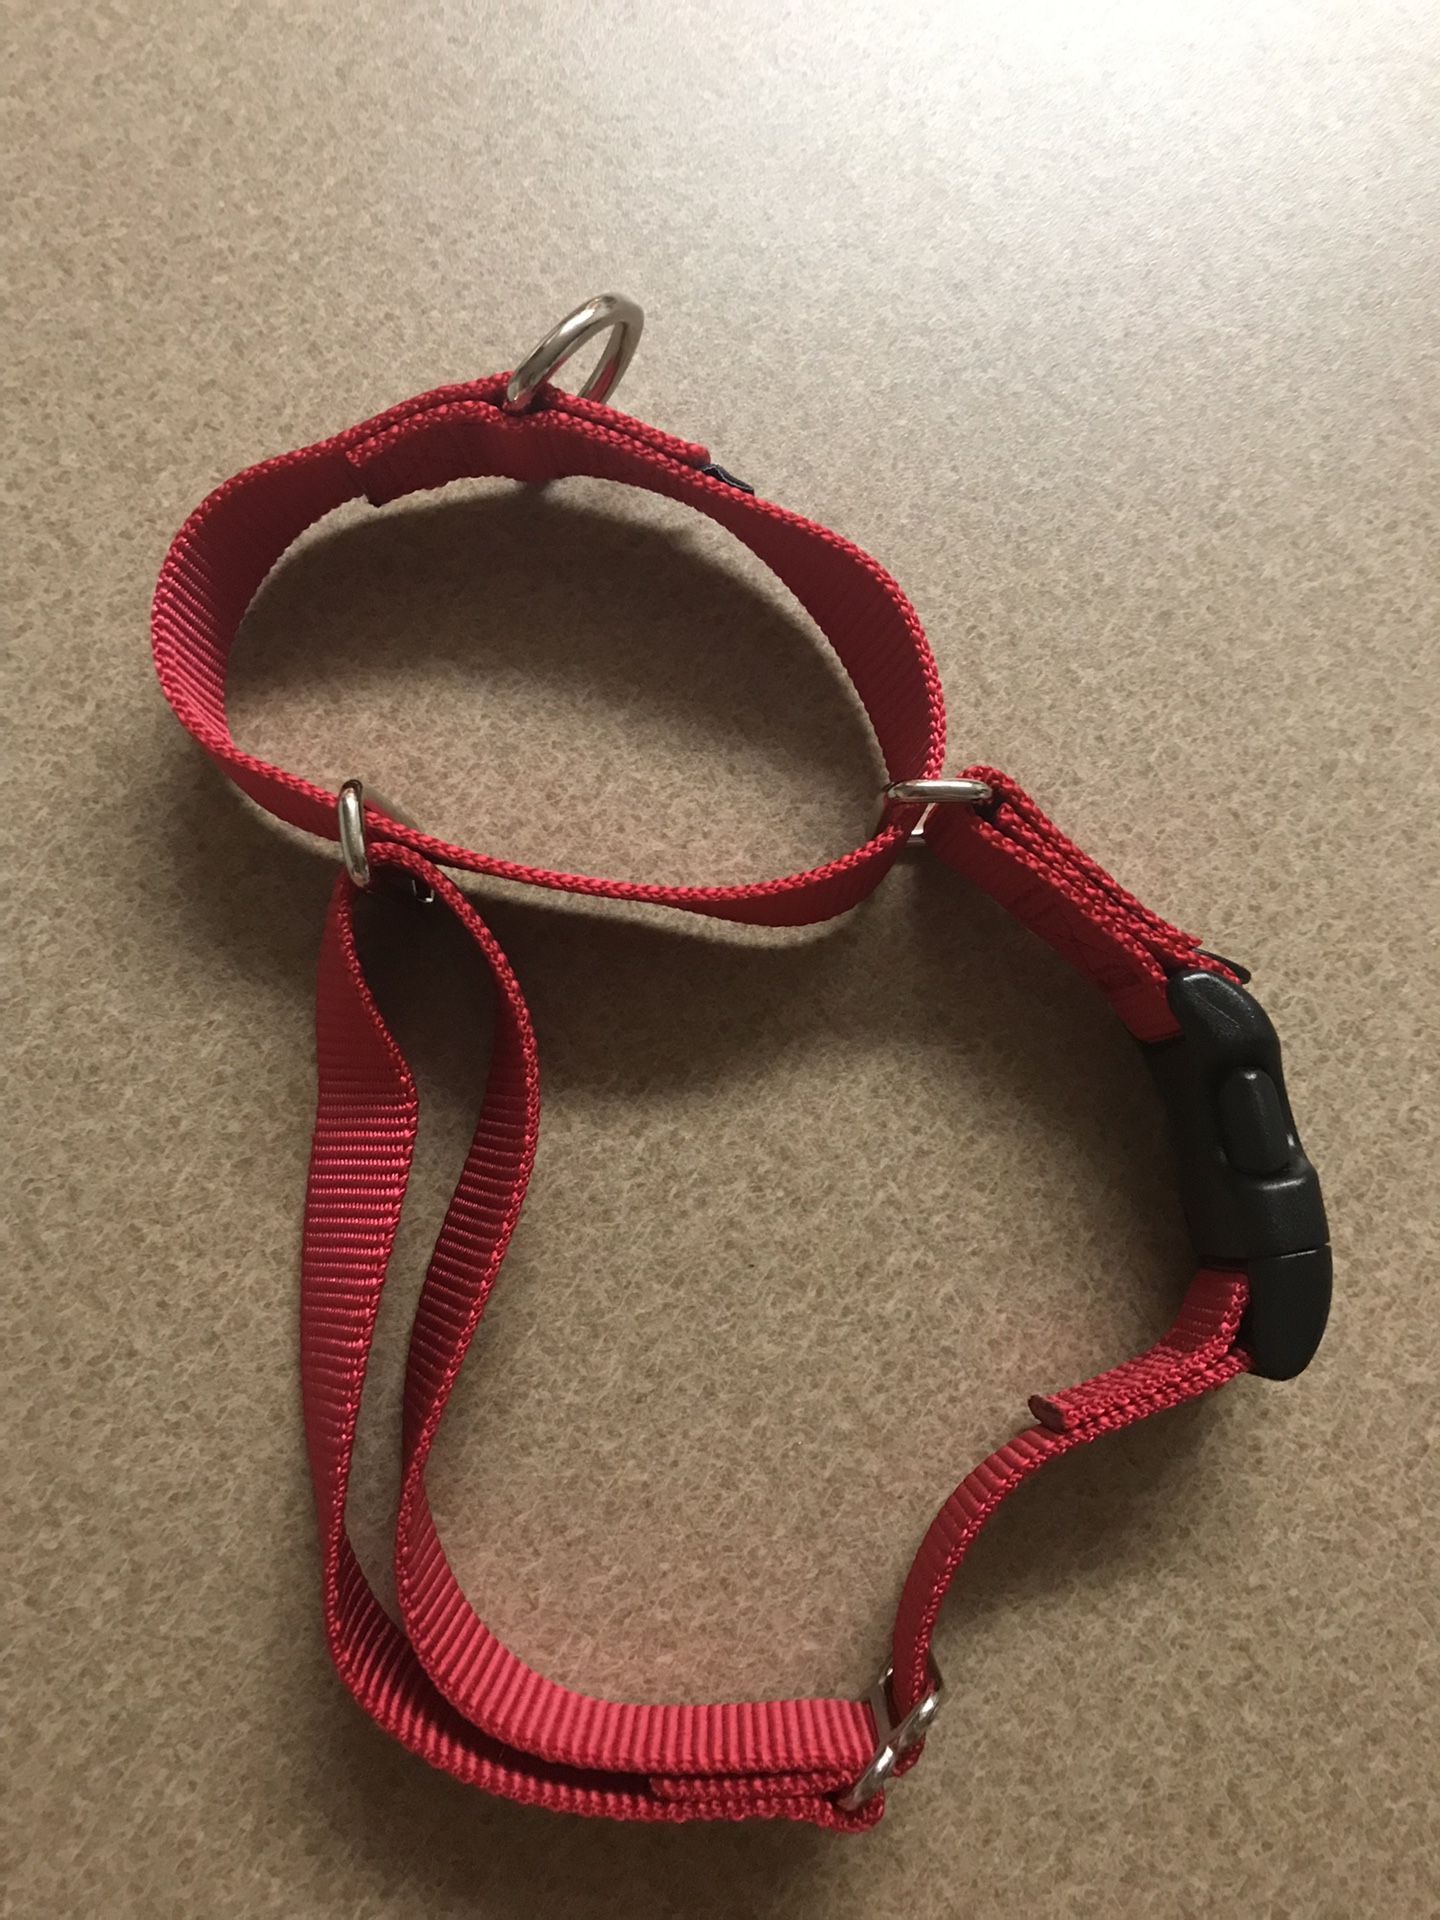 Dog harness medium size / new pet value products $10 each